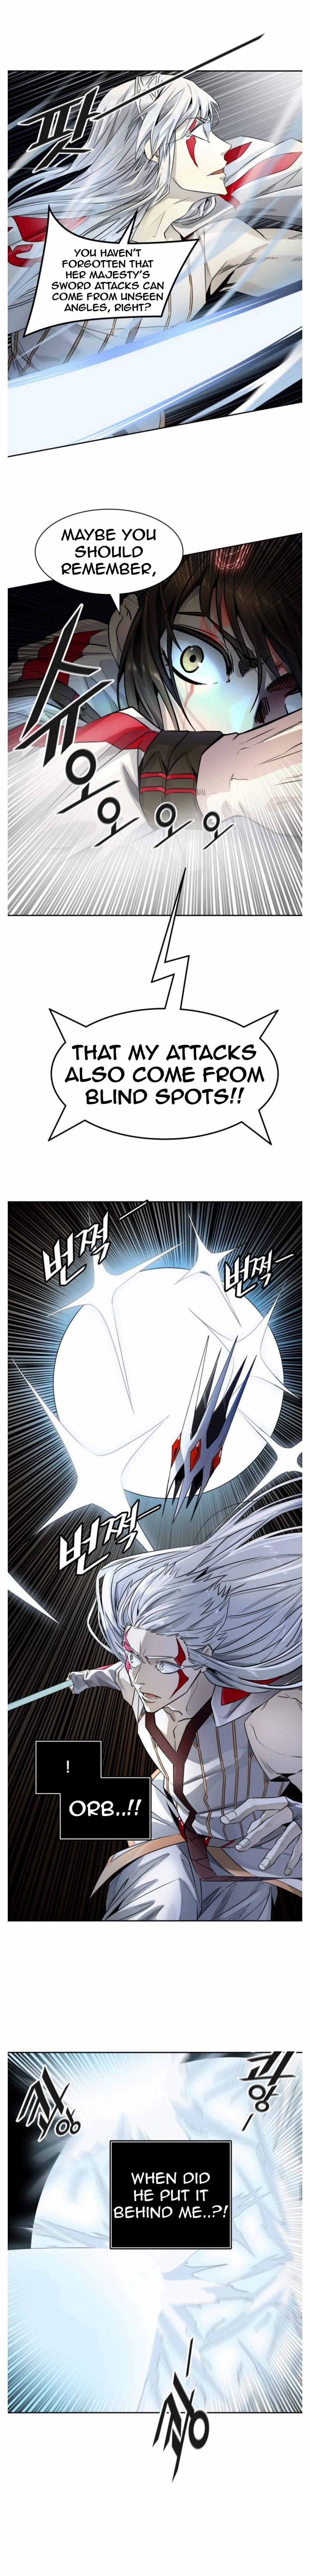 Tower of God Chapter 504 page 22